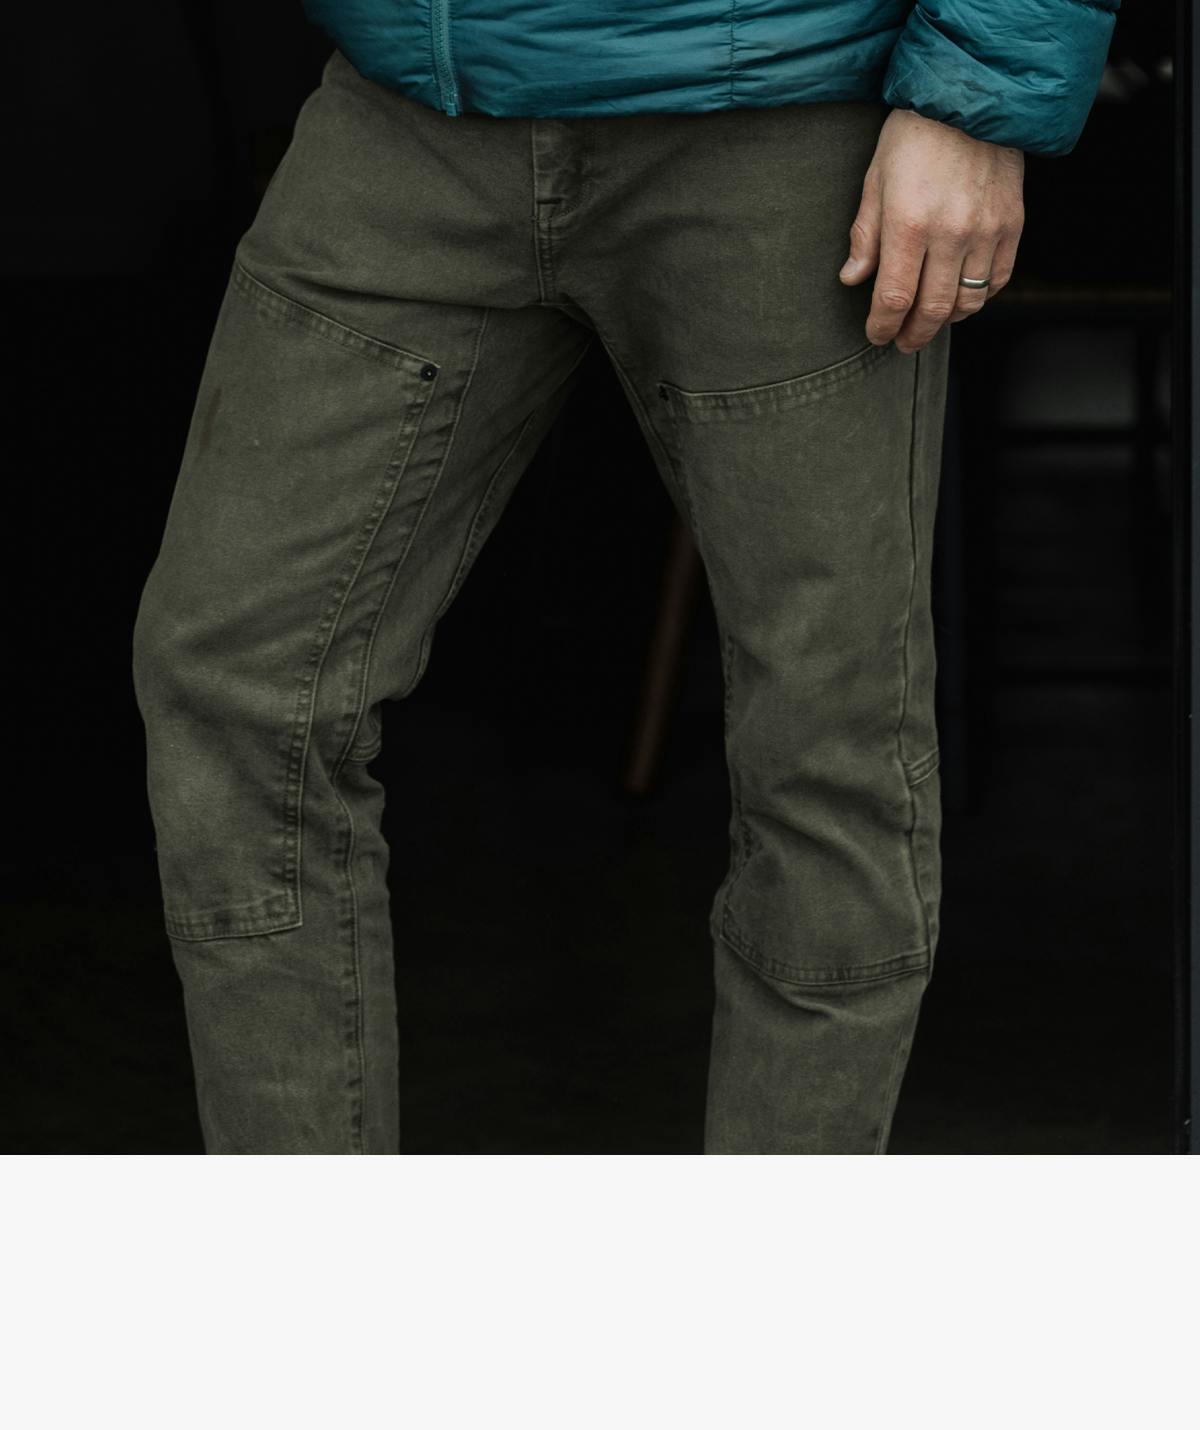 INTRODUCING: THE REINFORCED ROVER PANT 